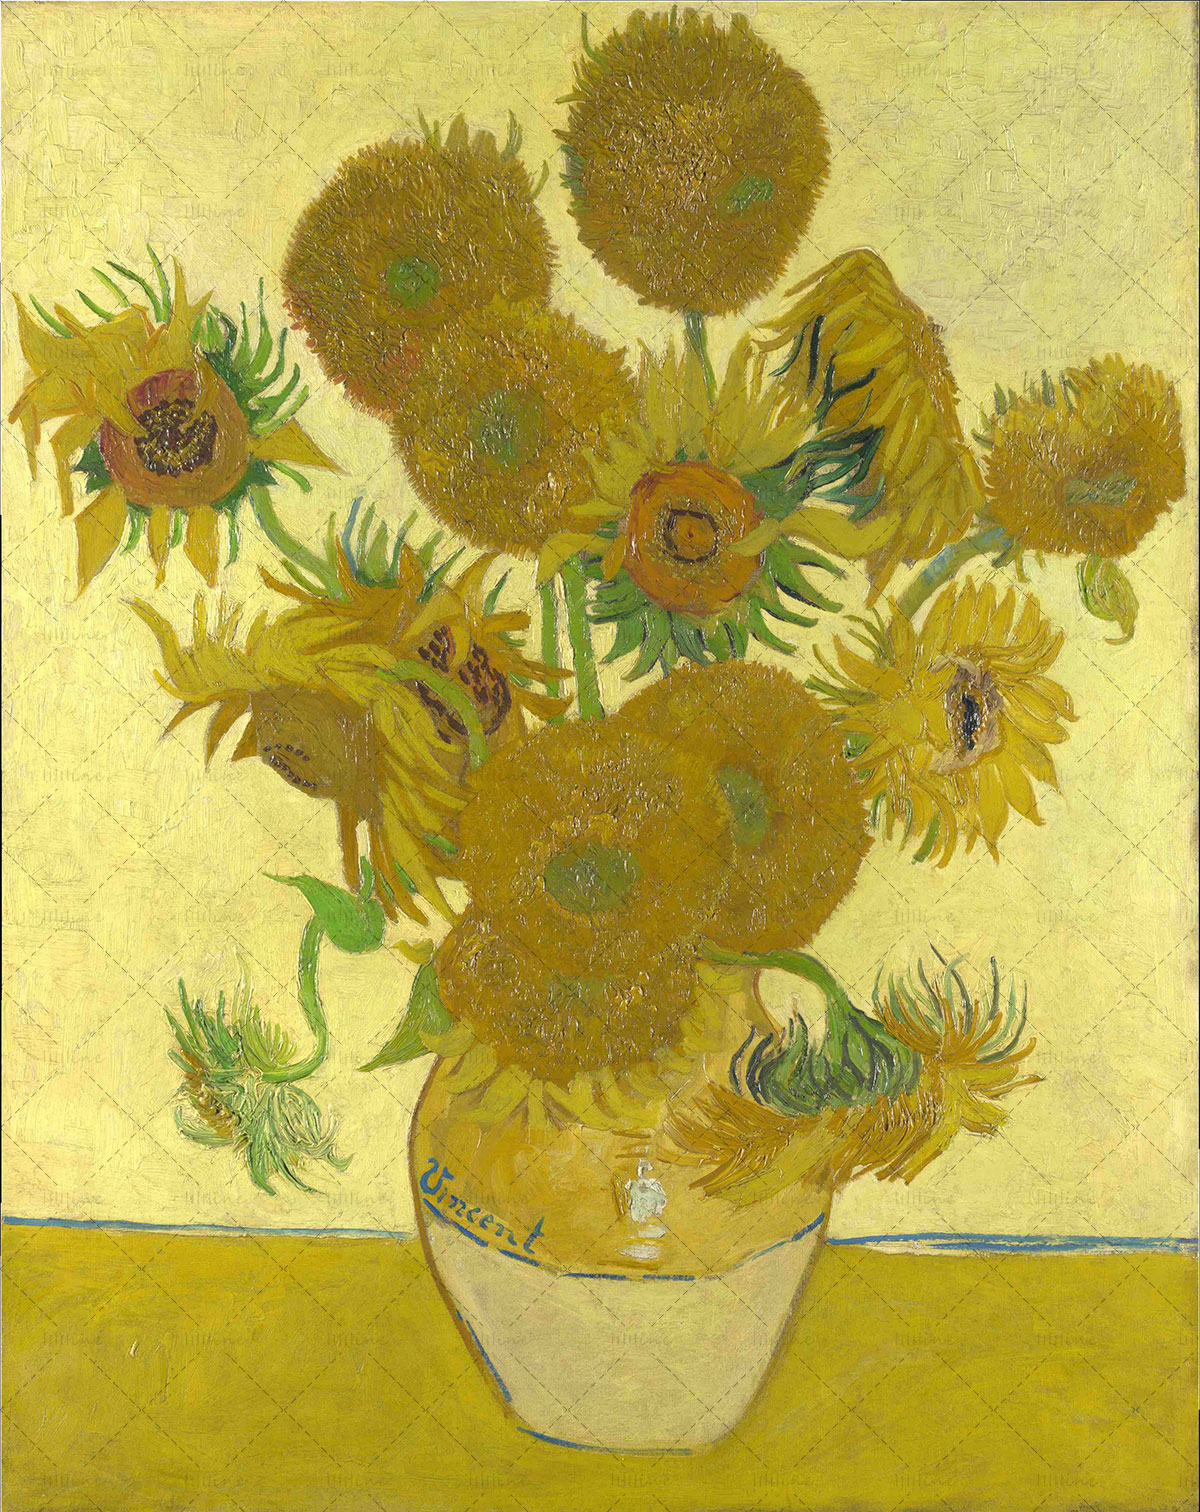 Oil Painting: Sunflowers (1888) by Vincent van Gogh